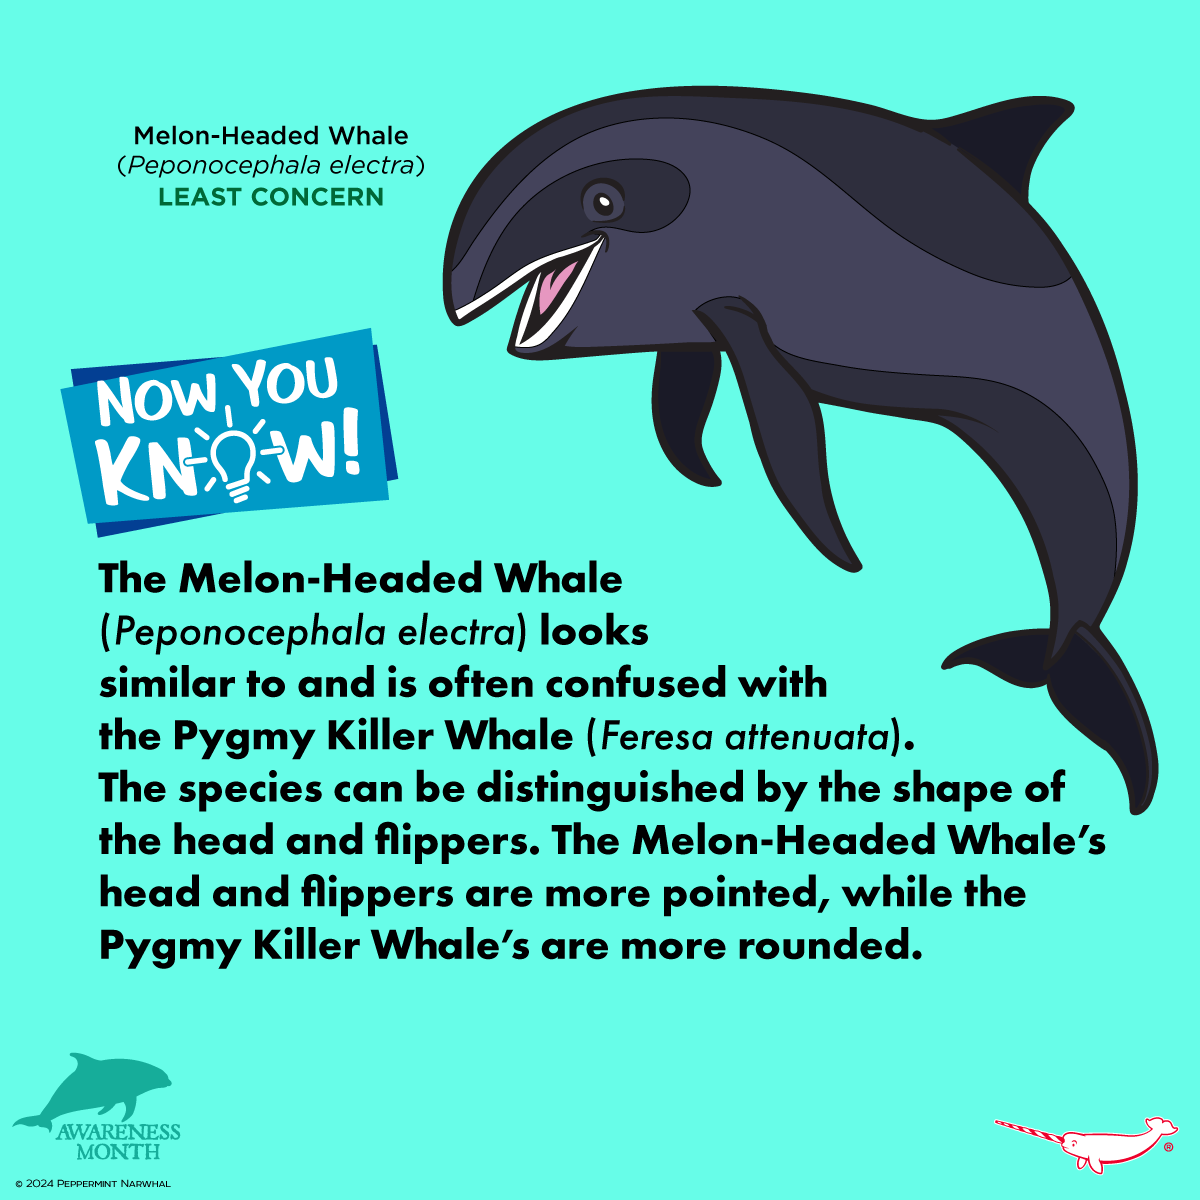 #NowYouKnow #MelonHeadedWhale #DolphinAwarenessMonth Dolphin Merch: peppermintnarwhal.com/s/search?q=dol… and for more great animal merch... Shop #PeppermintNarwhal: peppermintnarwhal.com #Peponocephala #DolphinAwareness #Dolphin